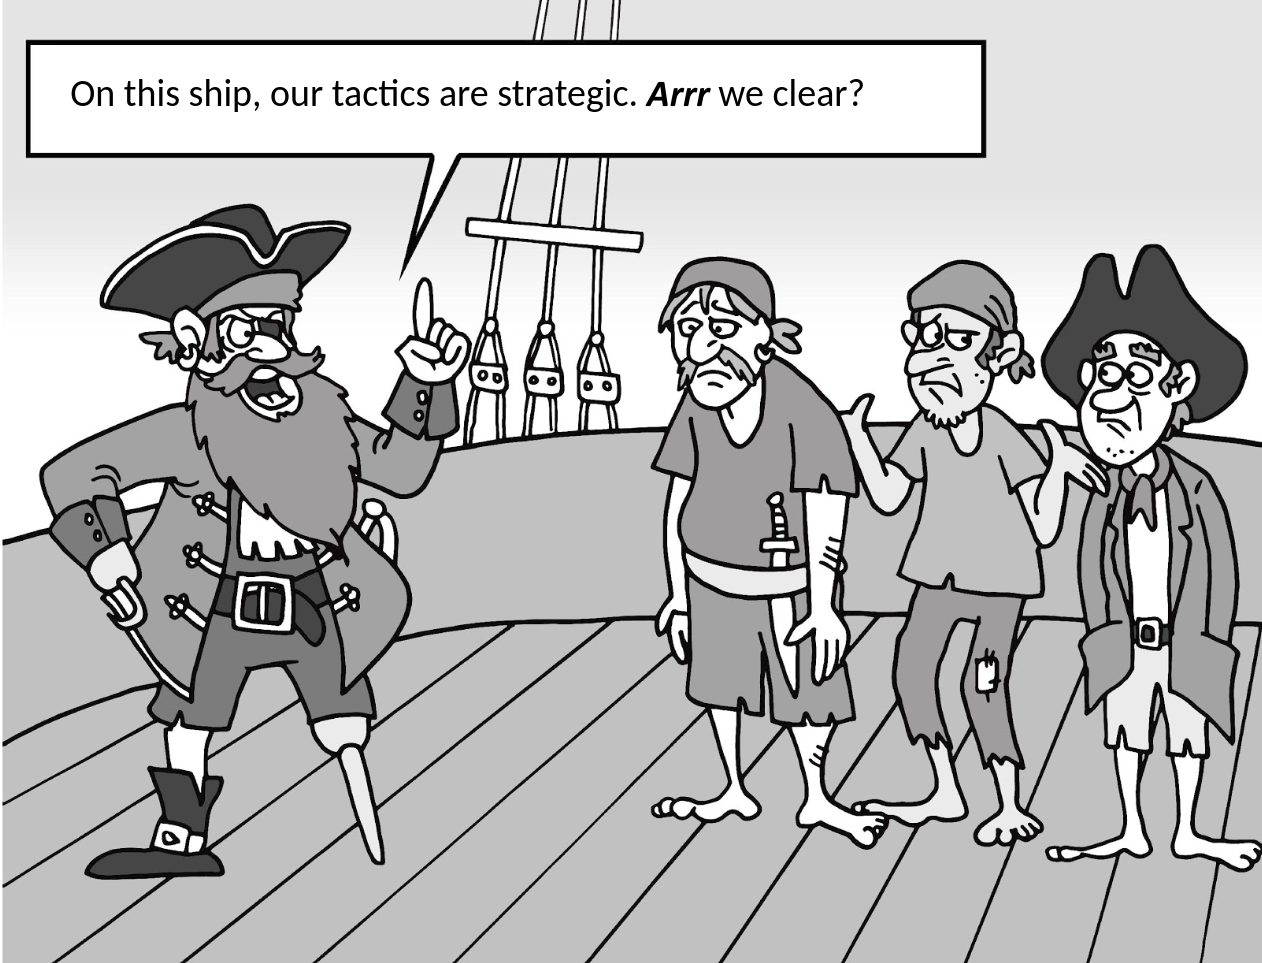 A Pirate's take on Strategy vs Tactics